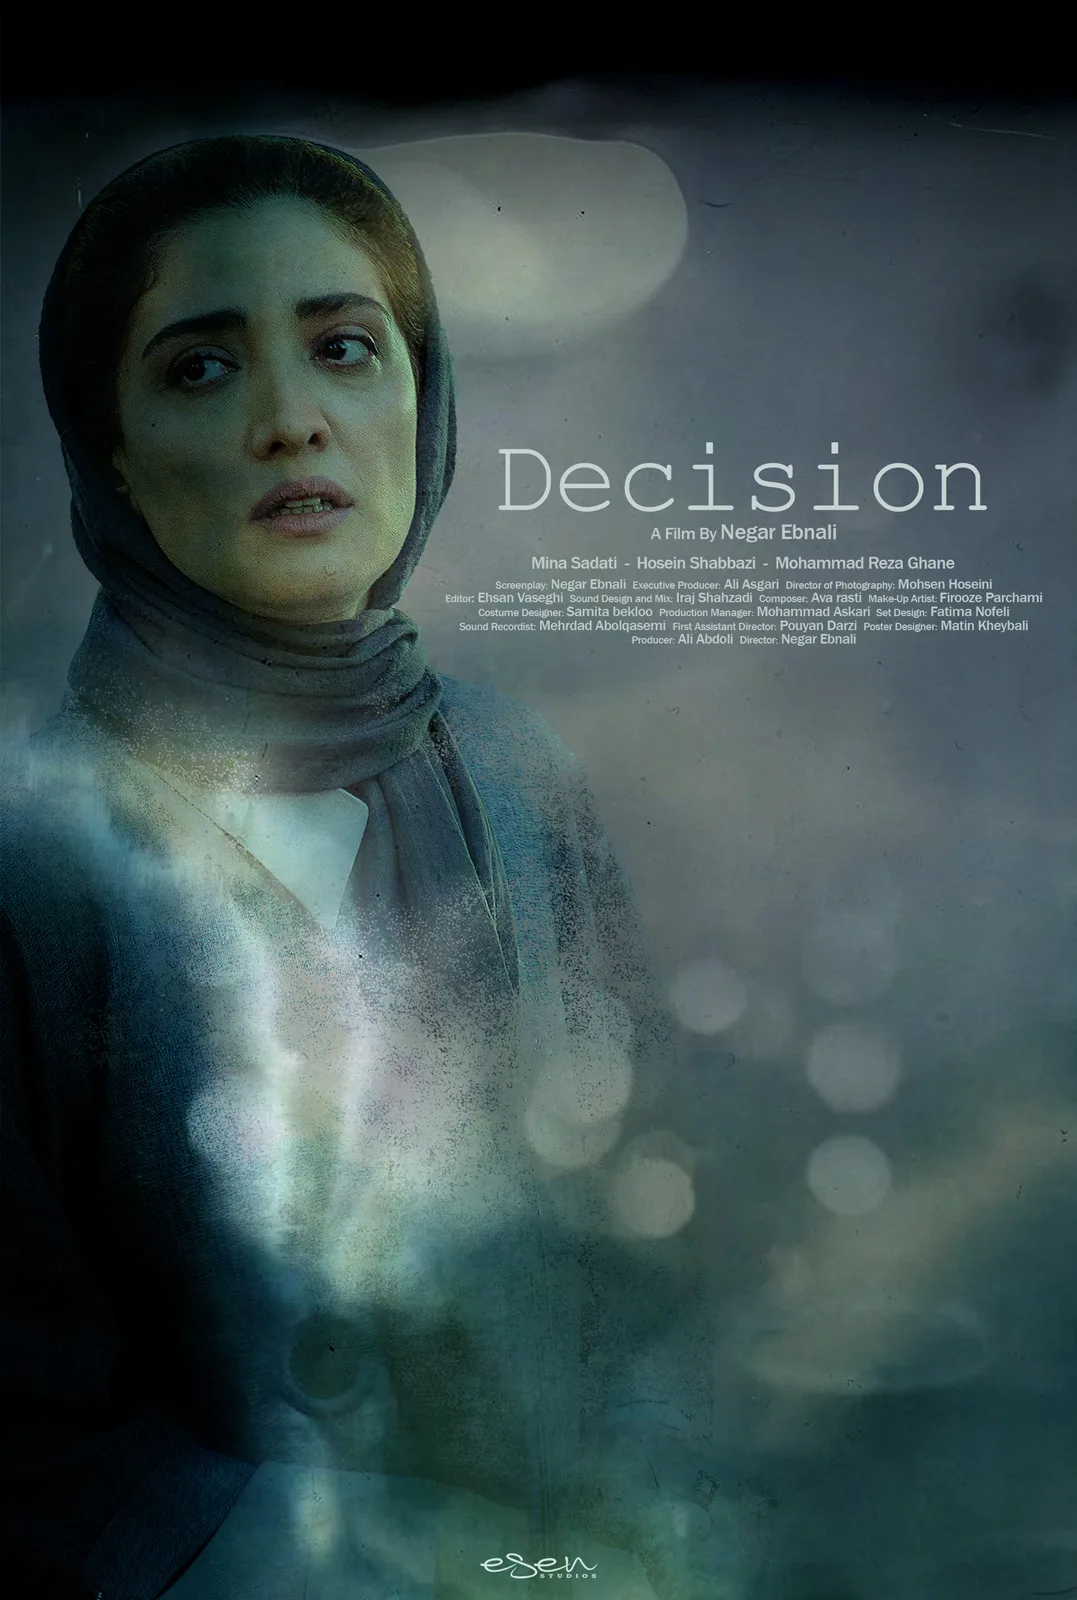 Poster of the short film "Decision" by Negar Ebnali